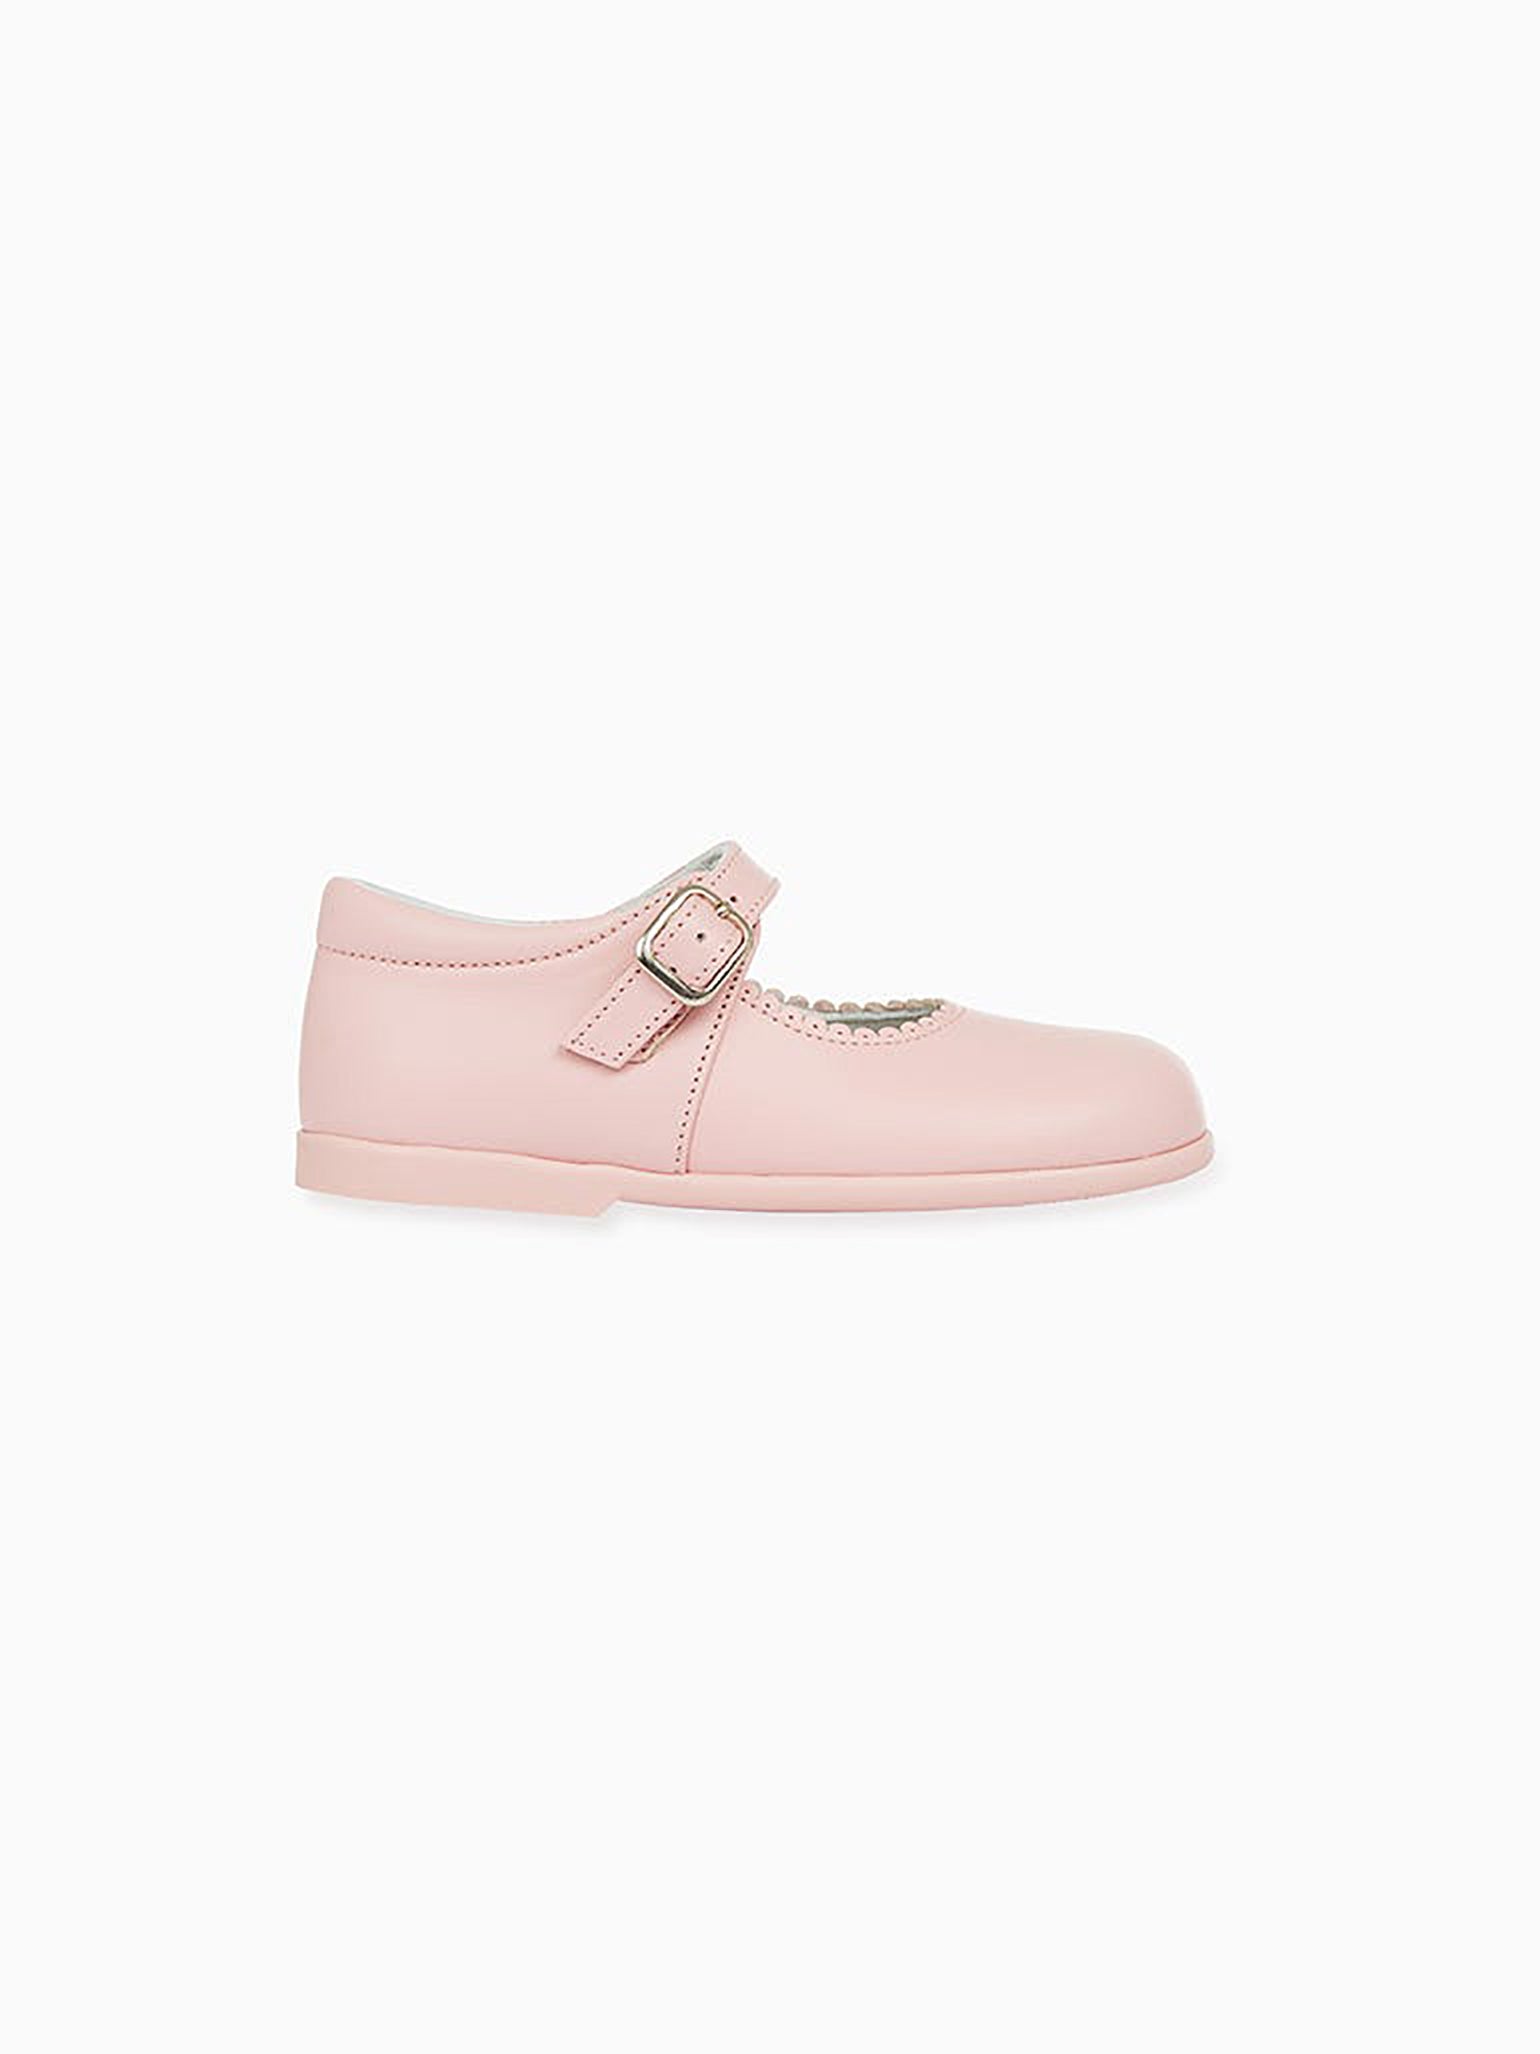 Light Pink Leather Toddler Mary Jane Shoes